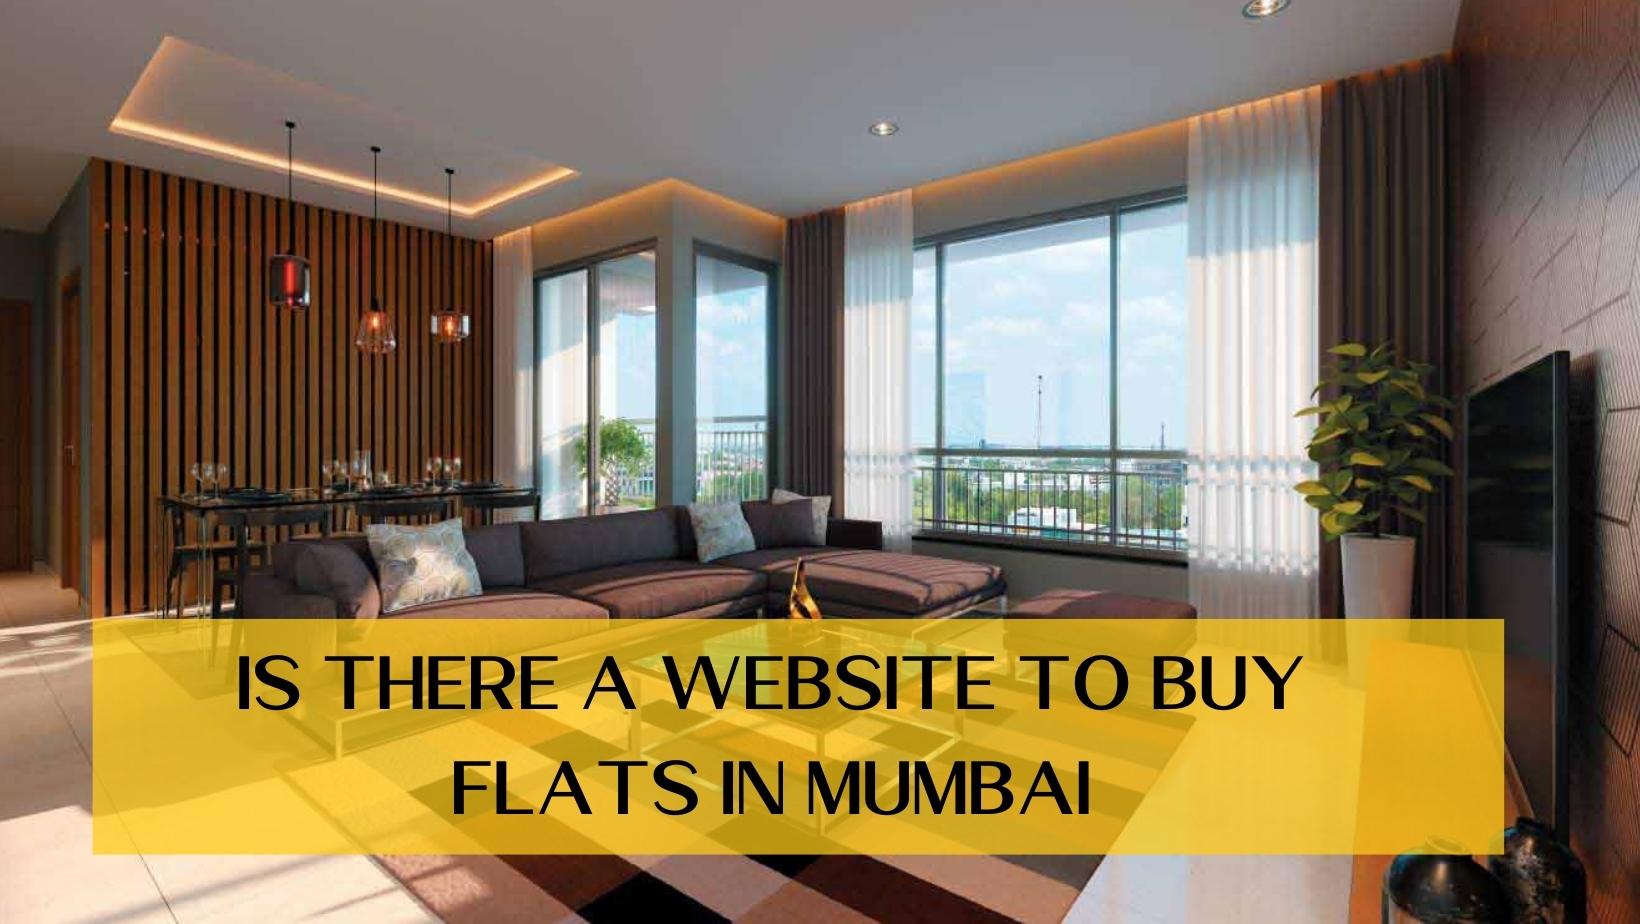 Is there any website to search for buying flats in Mumbai?